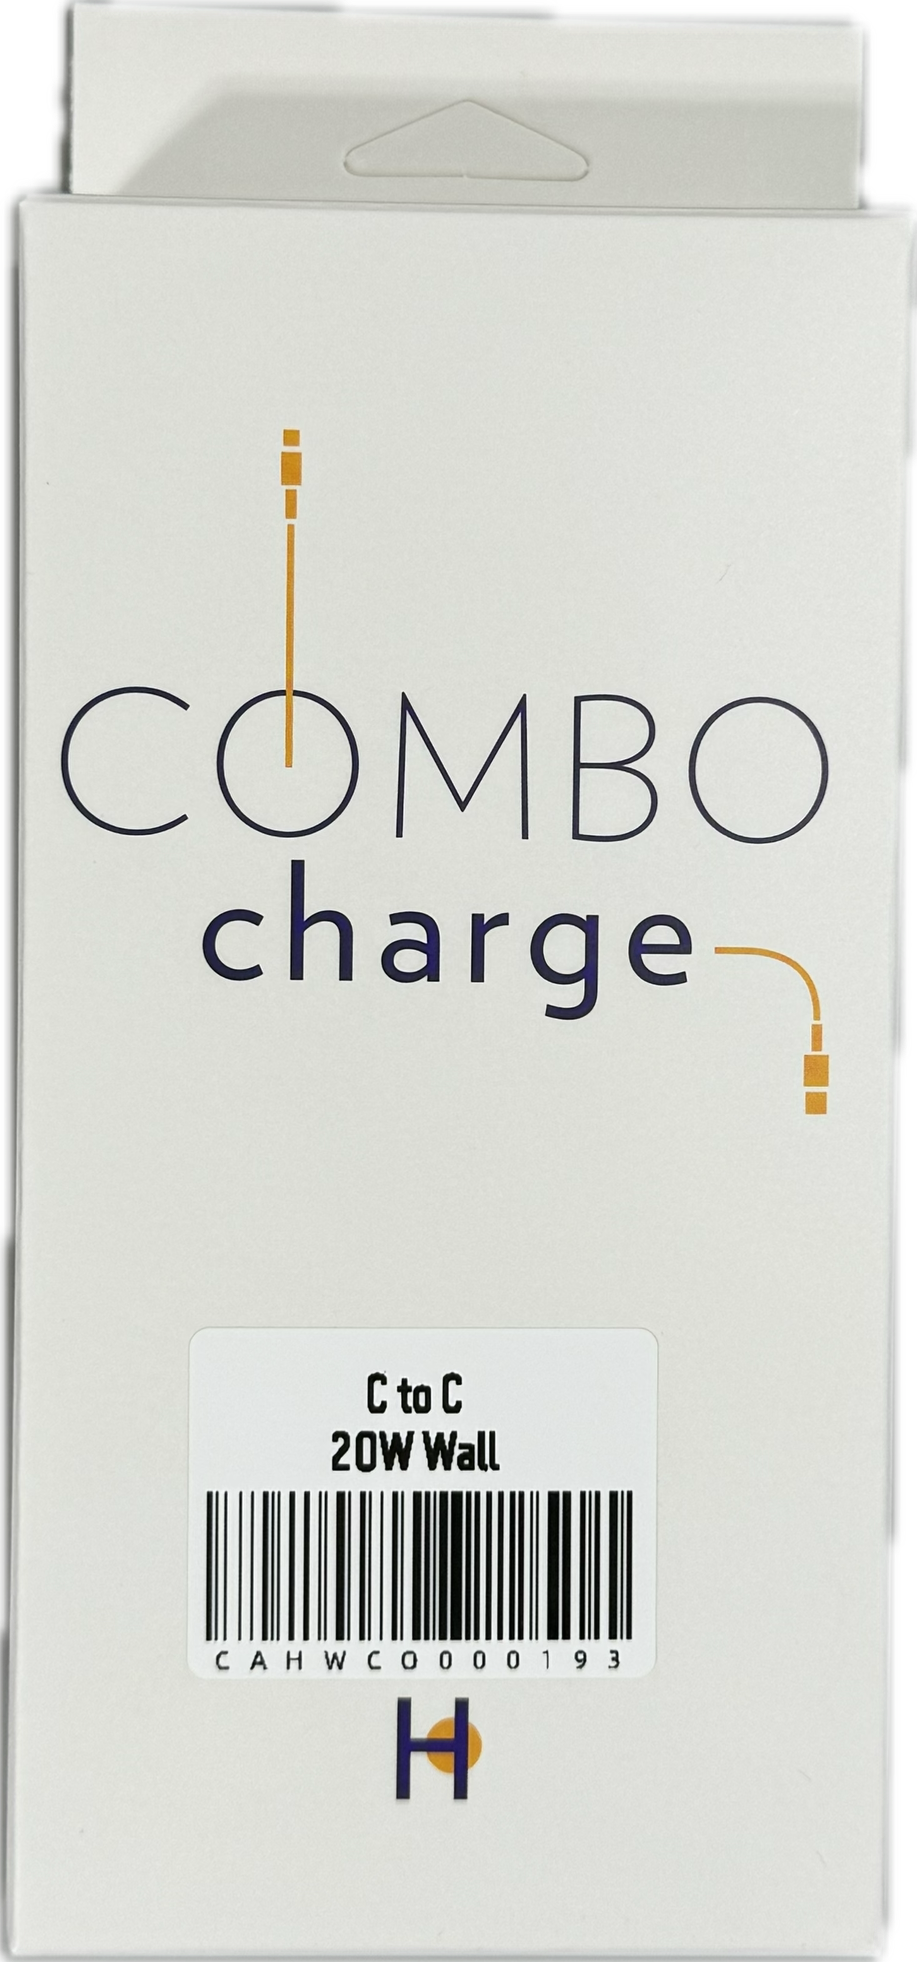 Helium Wireless C to C 20W Wall charger Combo